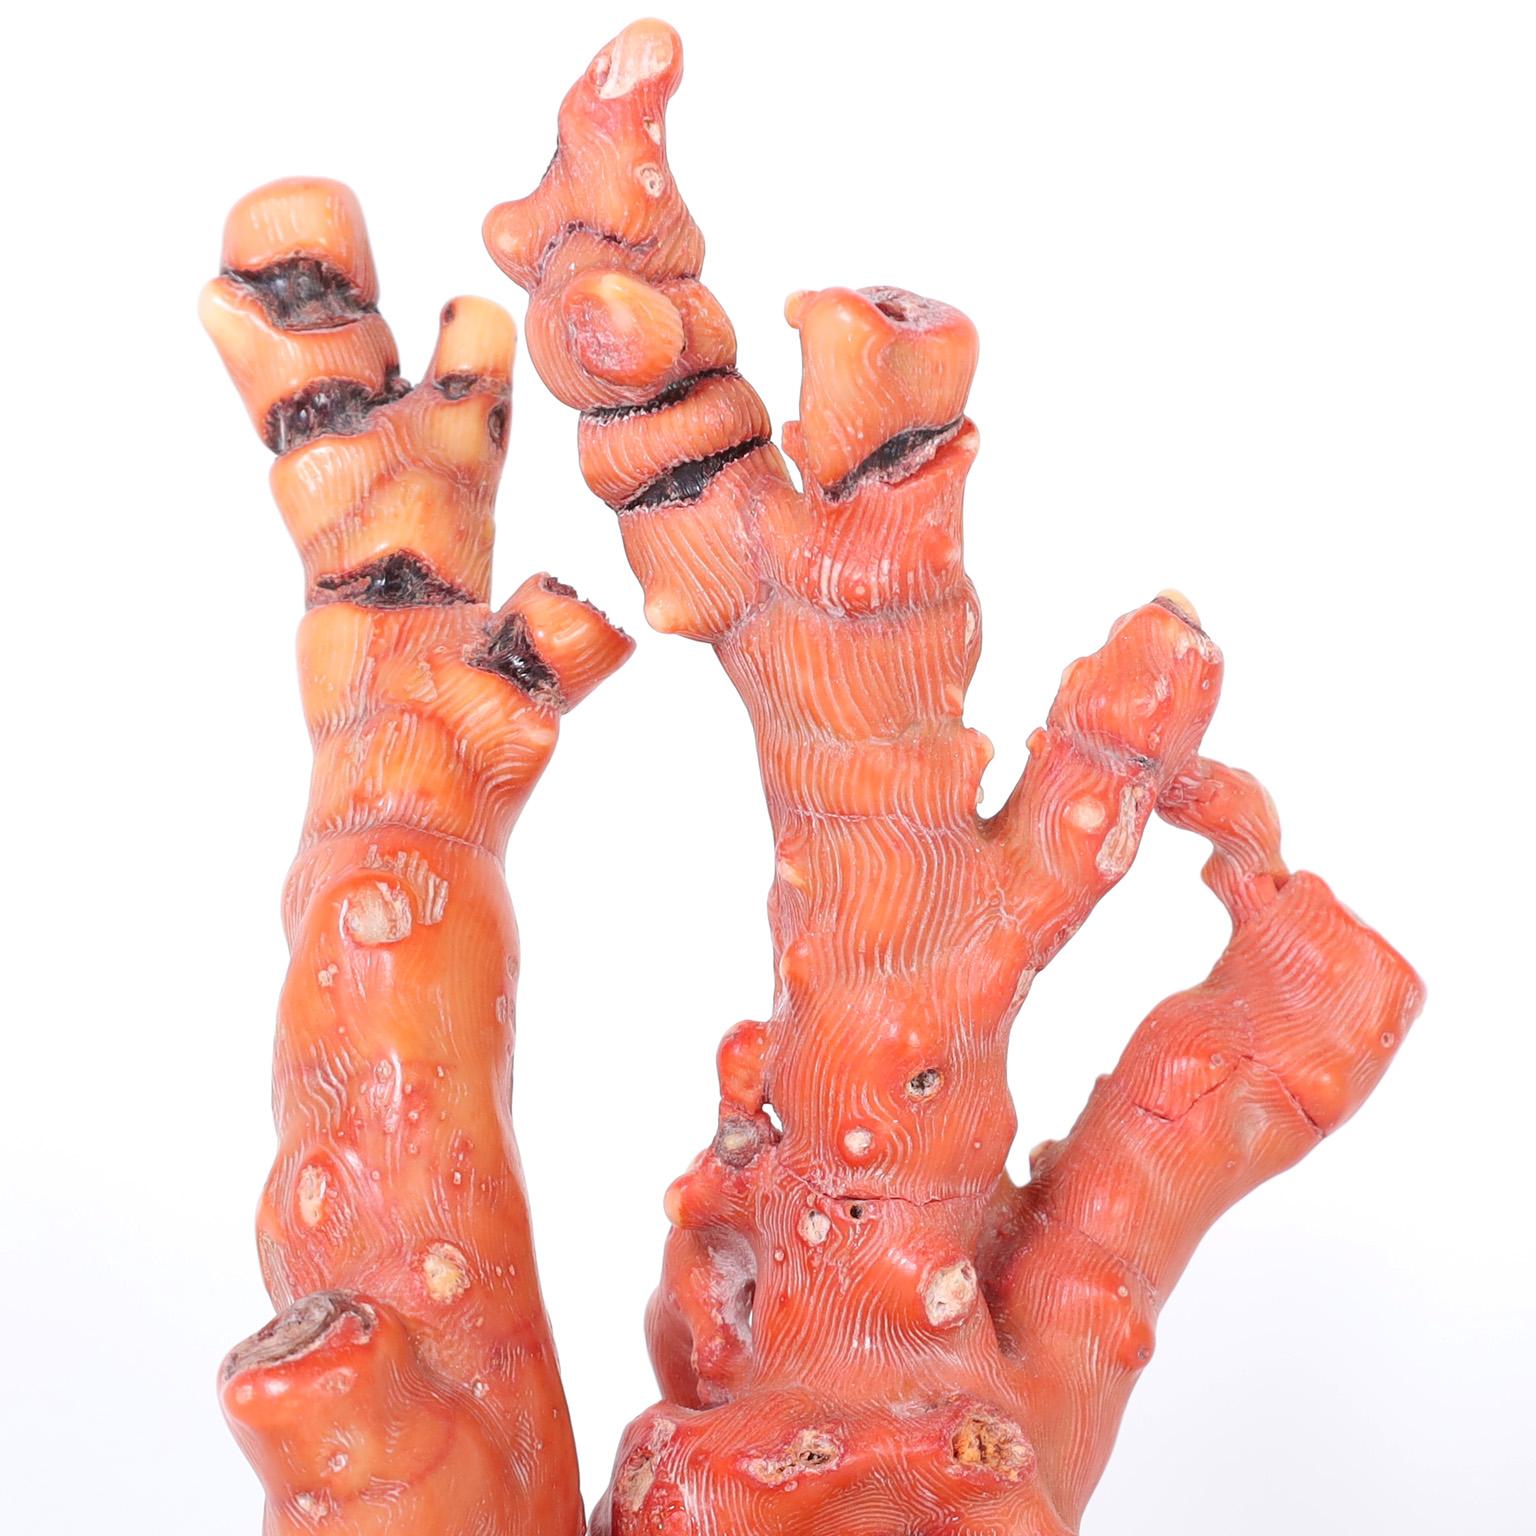 Authentic Chinese red bamboo coral fossil specimen with its enchanting soft red color and organic form. Presented on a Lucite Stand to enhance the sculptural elements.
     